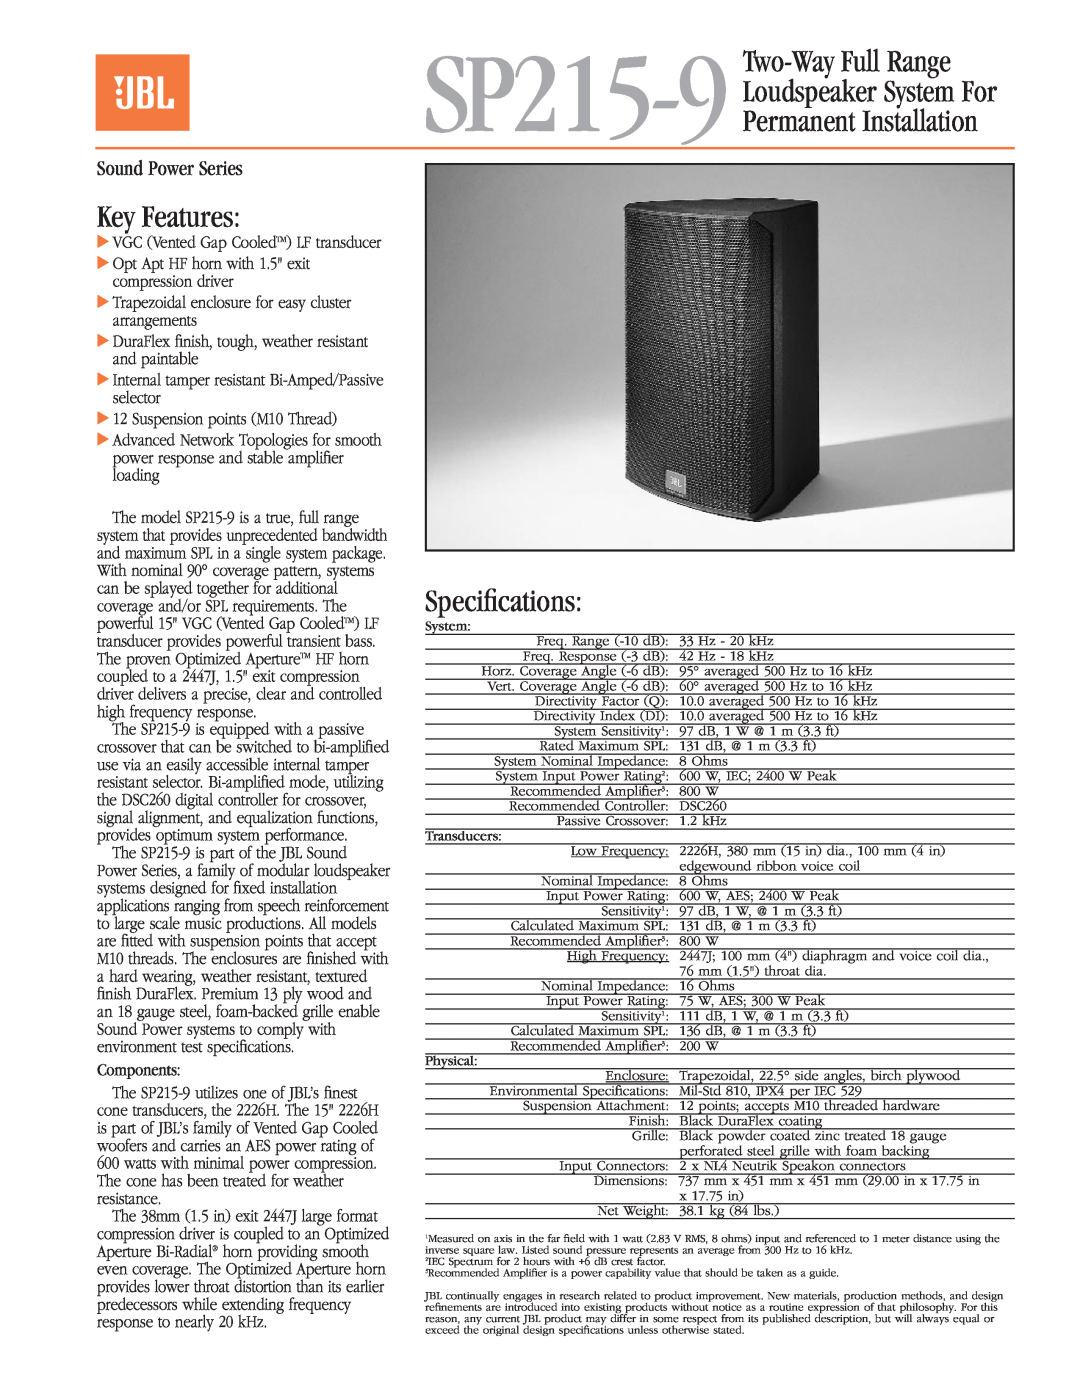 JBL SP215-9 specifications Loudspeaker System For Permanent Installation, Key Features, Speciﬁcations, Sound Power Series 